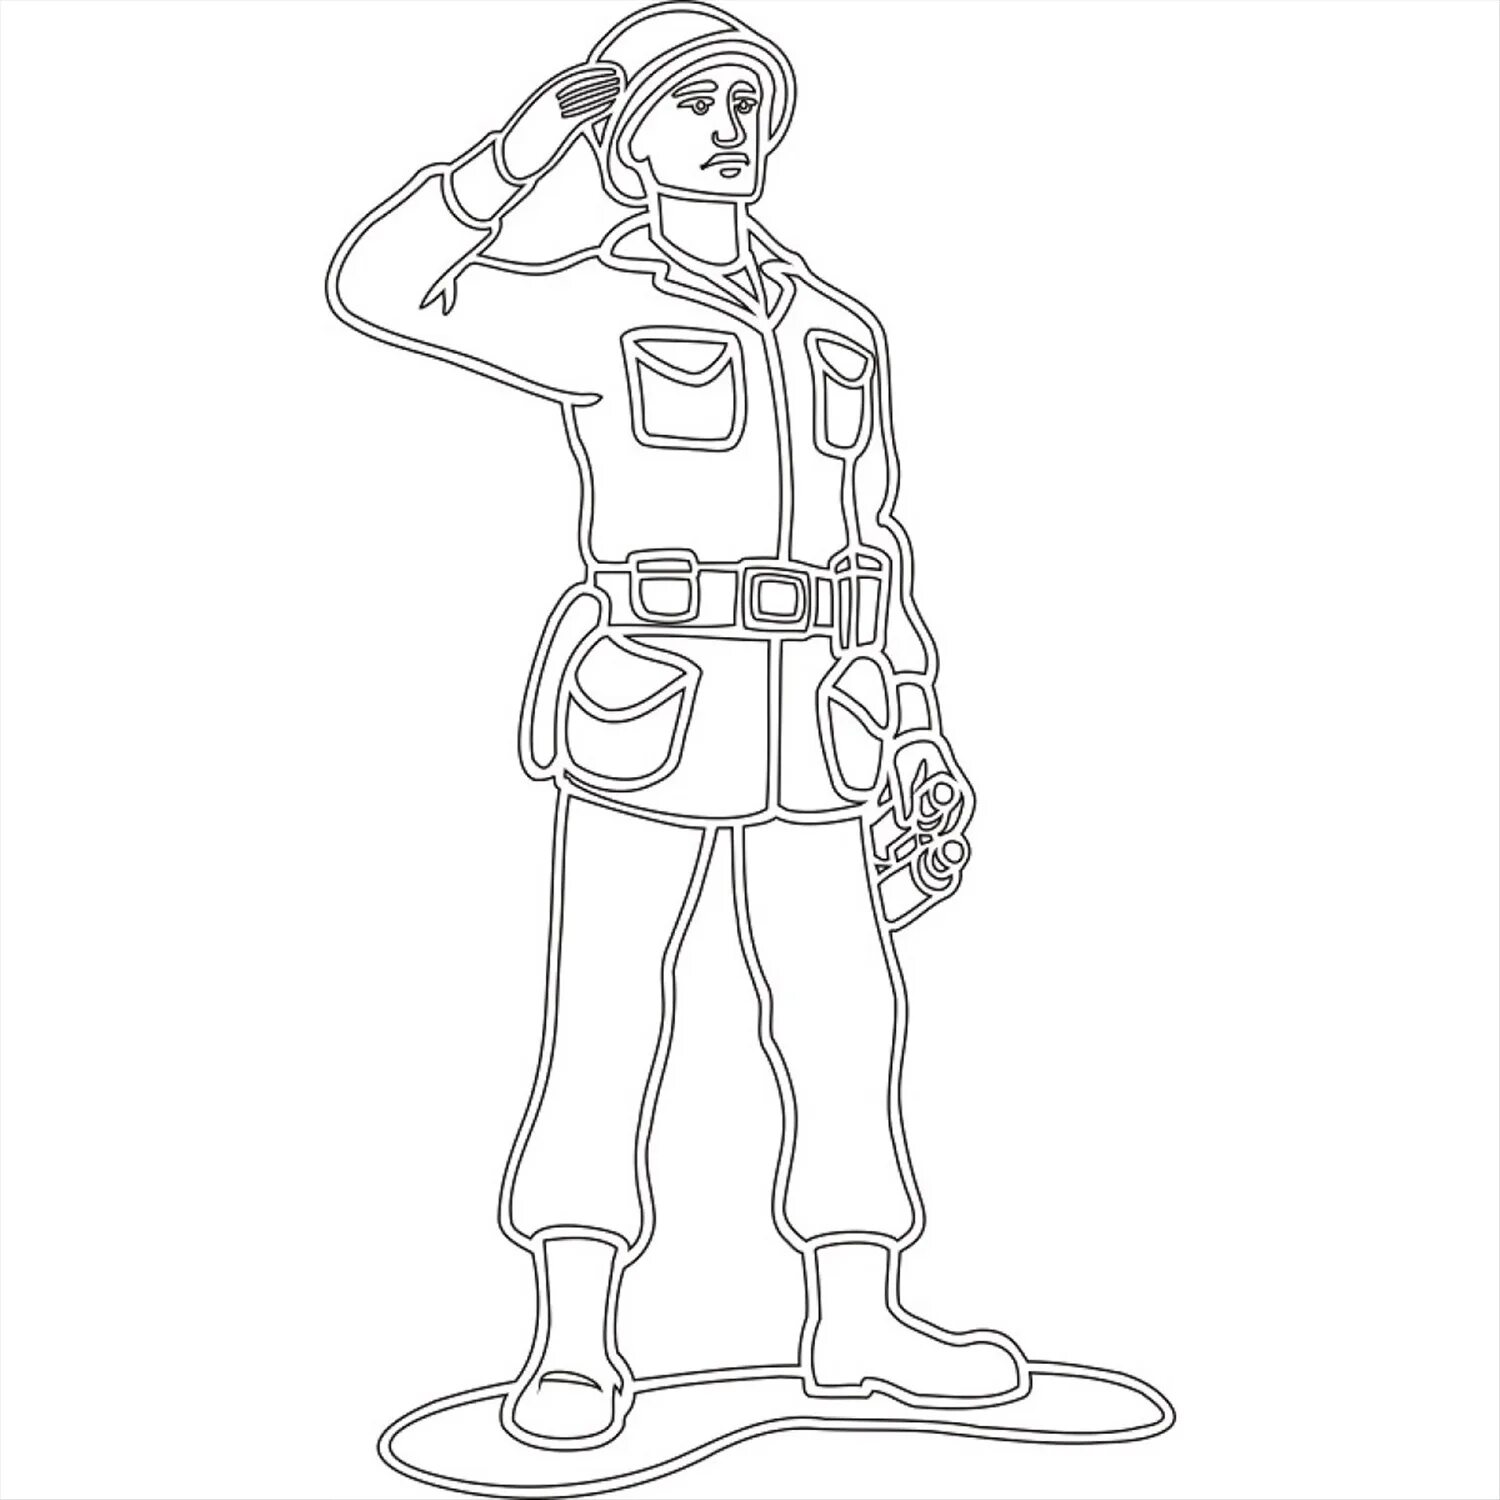 Microscopic soldier coloring page